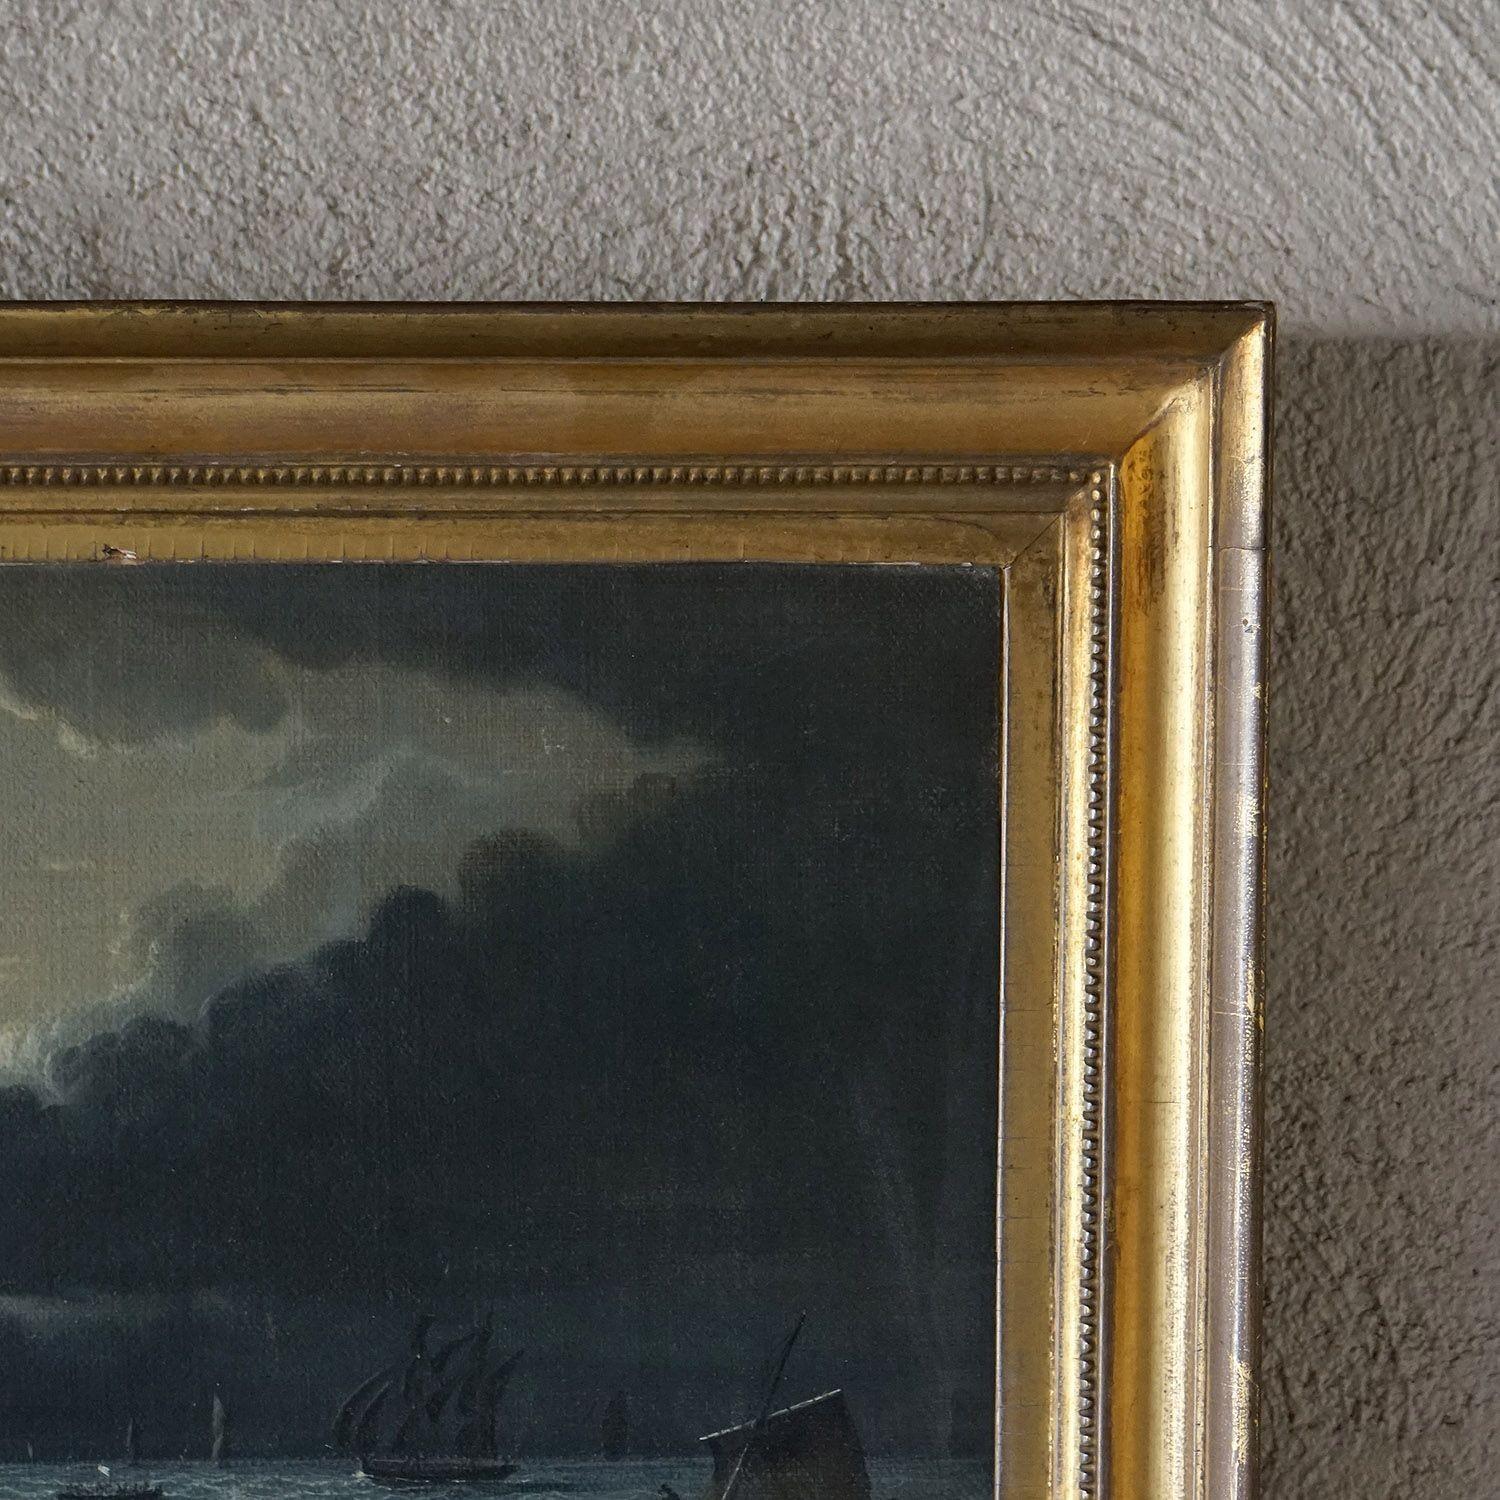 Seascape Depicting a Burning Ship, Antique Original Oil on Canvas Painting 2